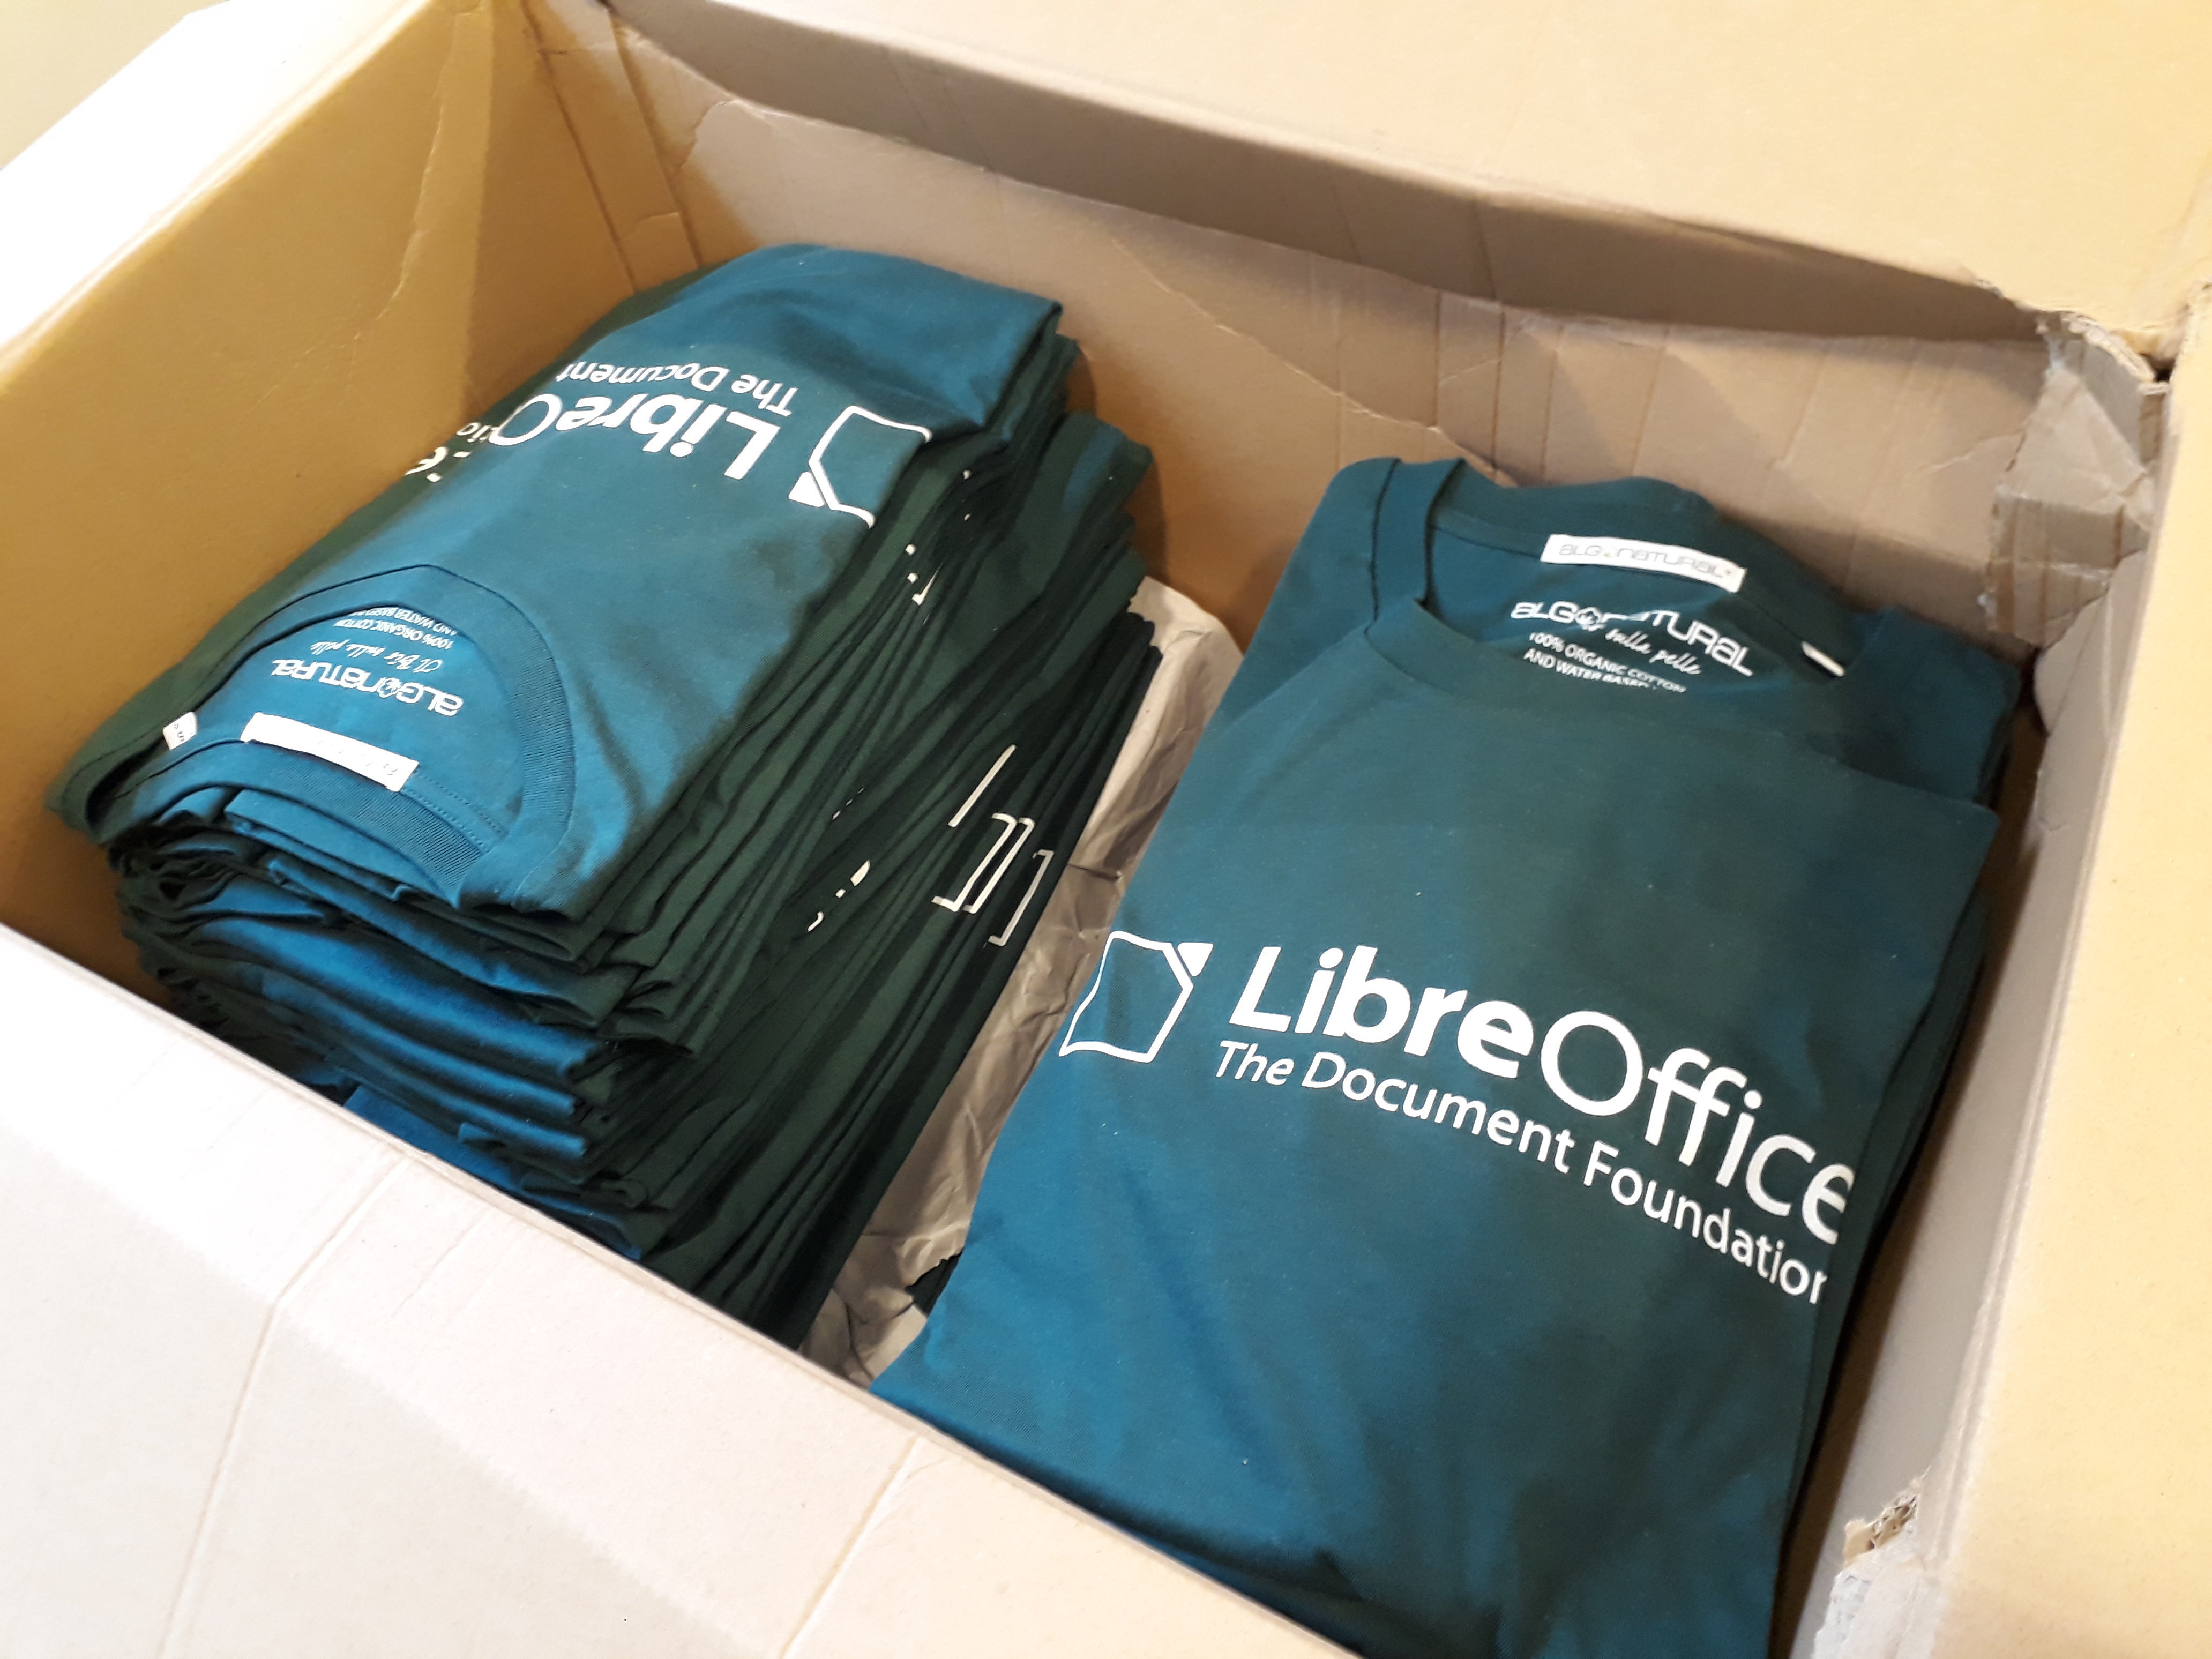 Merchandise at LibreOffice Conference 2022